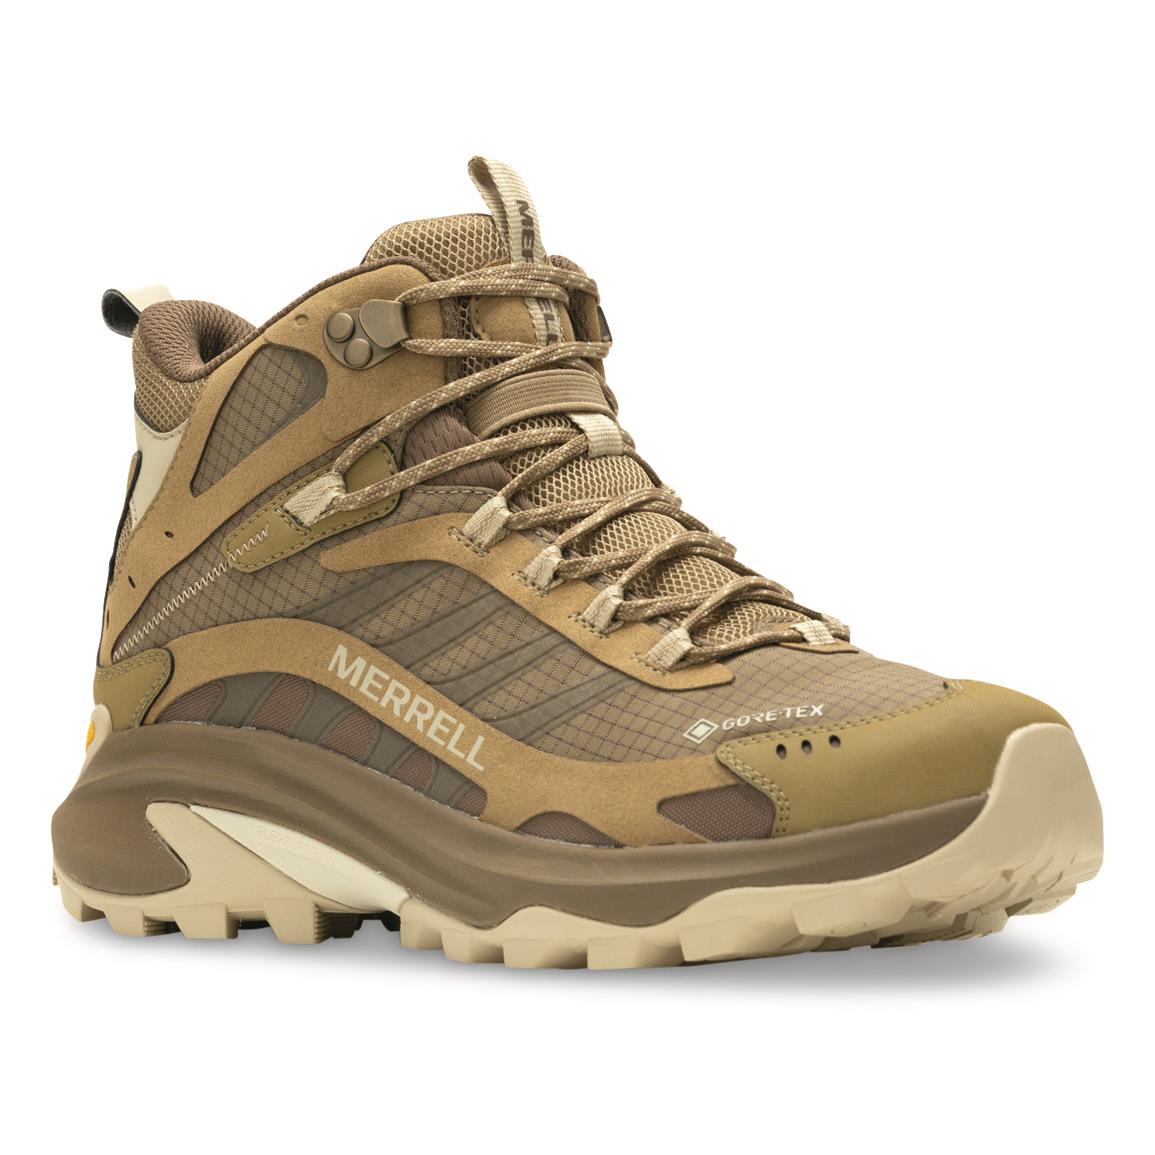 Merrell Men's MOAB Speed 2 Mid GORE-TEX Hiking Boots, Coyote